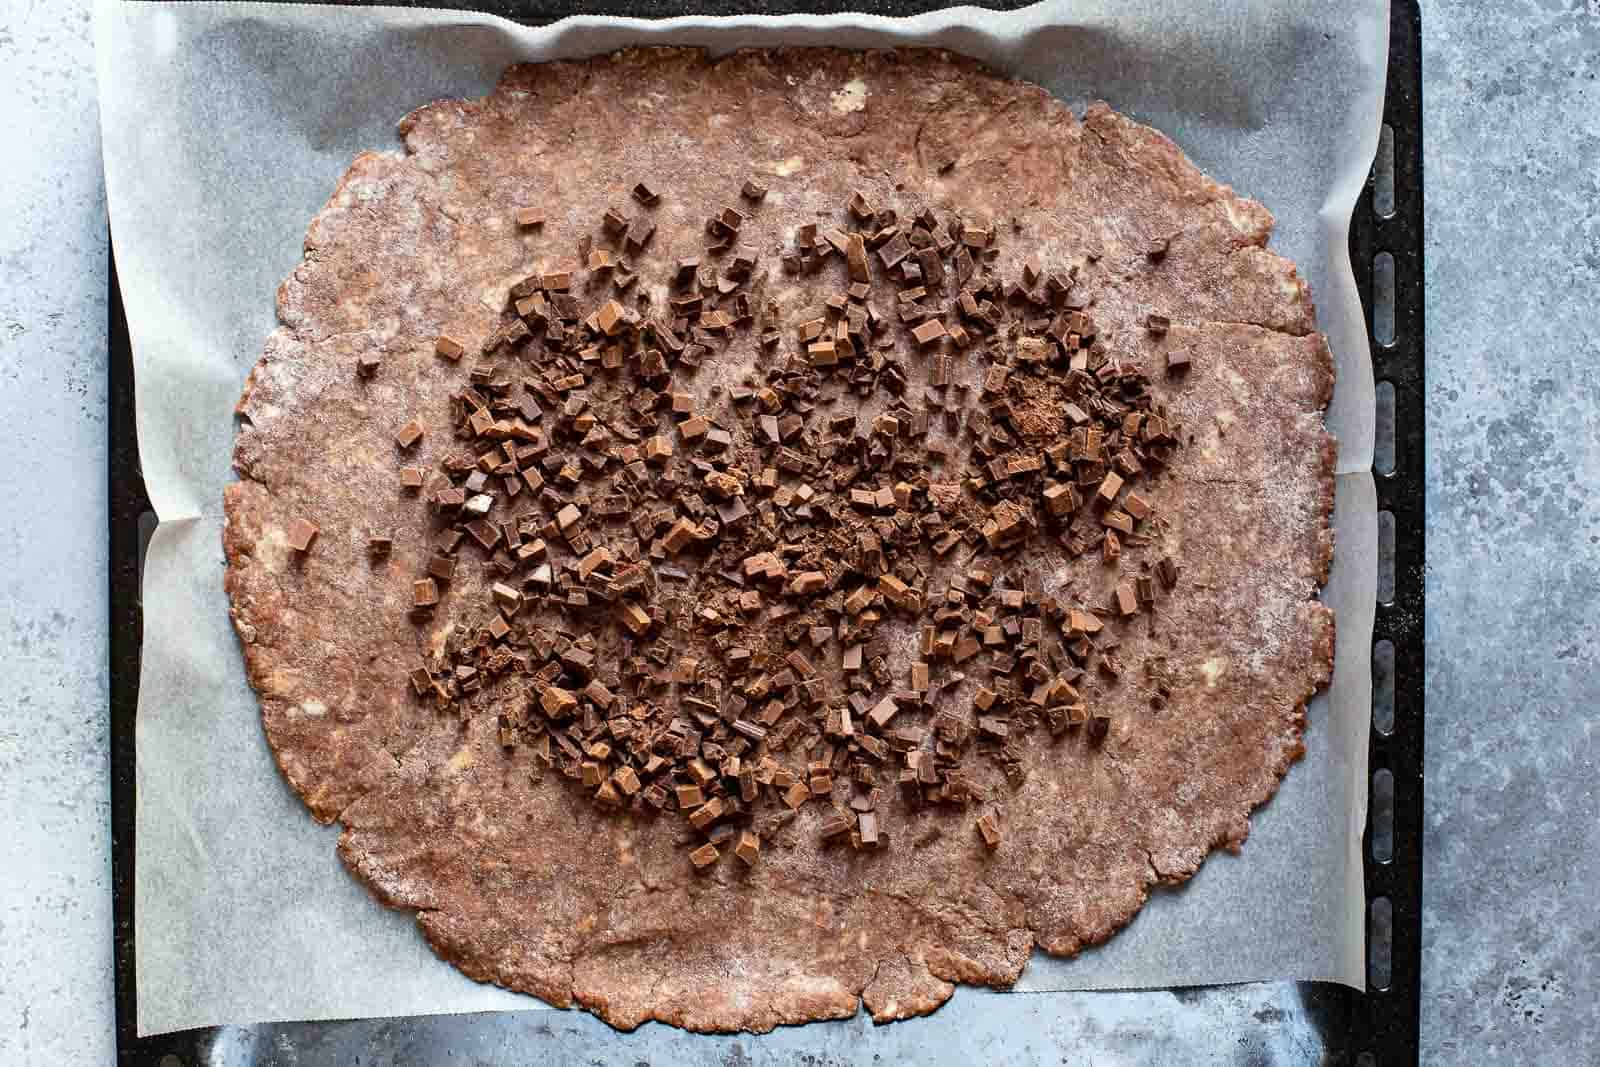 raw chocolate pie dough covered with pieces of dark chocolate